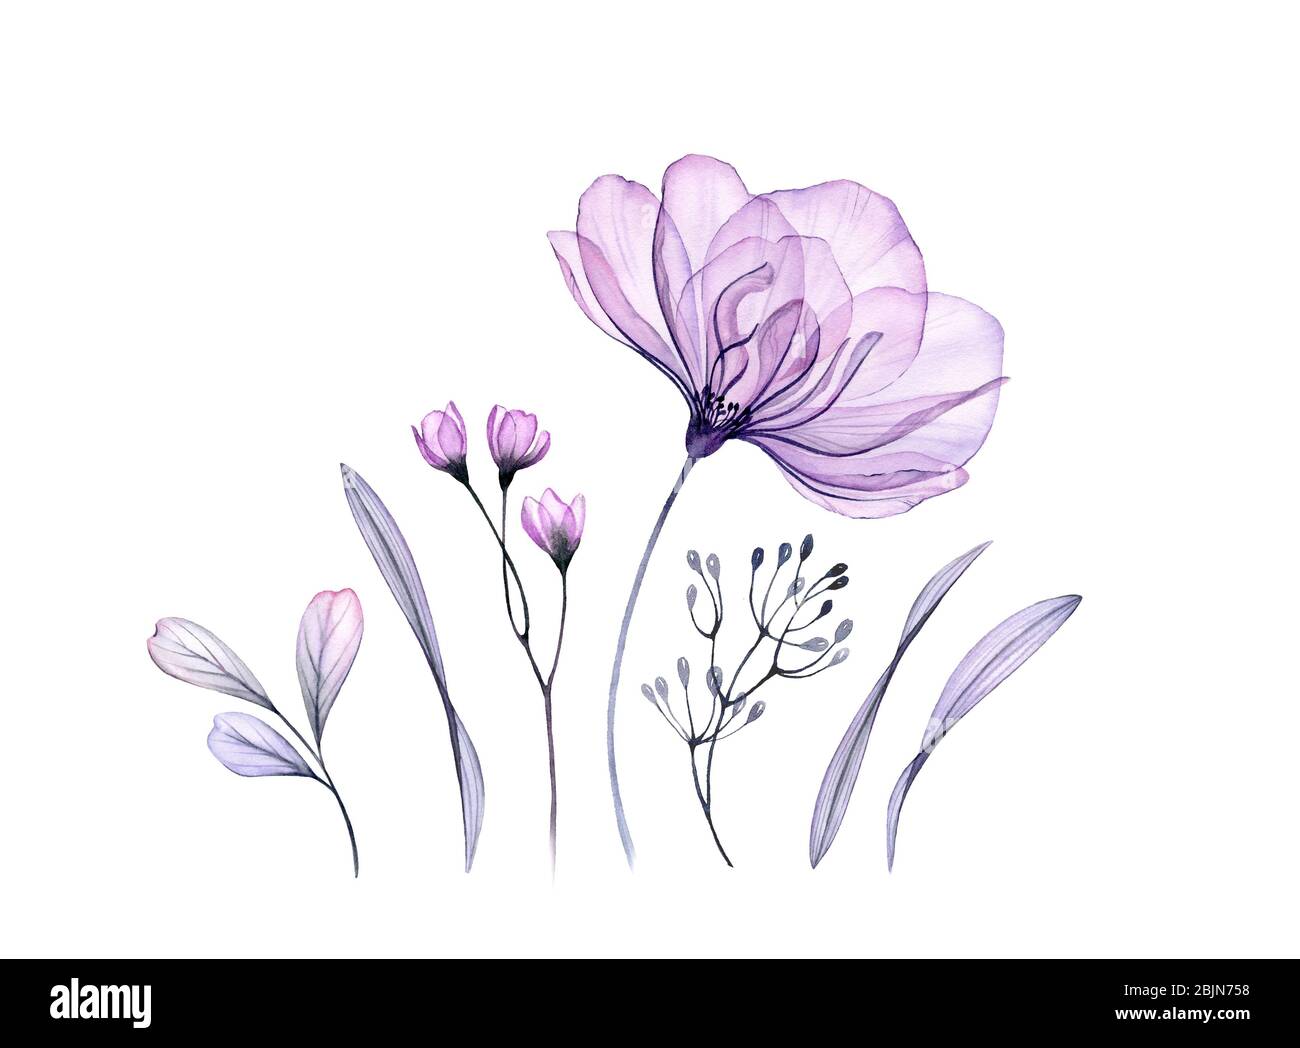 Watercolor floral set in purple. Transparent rose, leaves, branches isolated on white. Botanical abstract collection of illustrations for cards Stock Photo